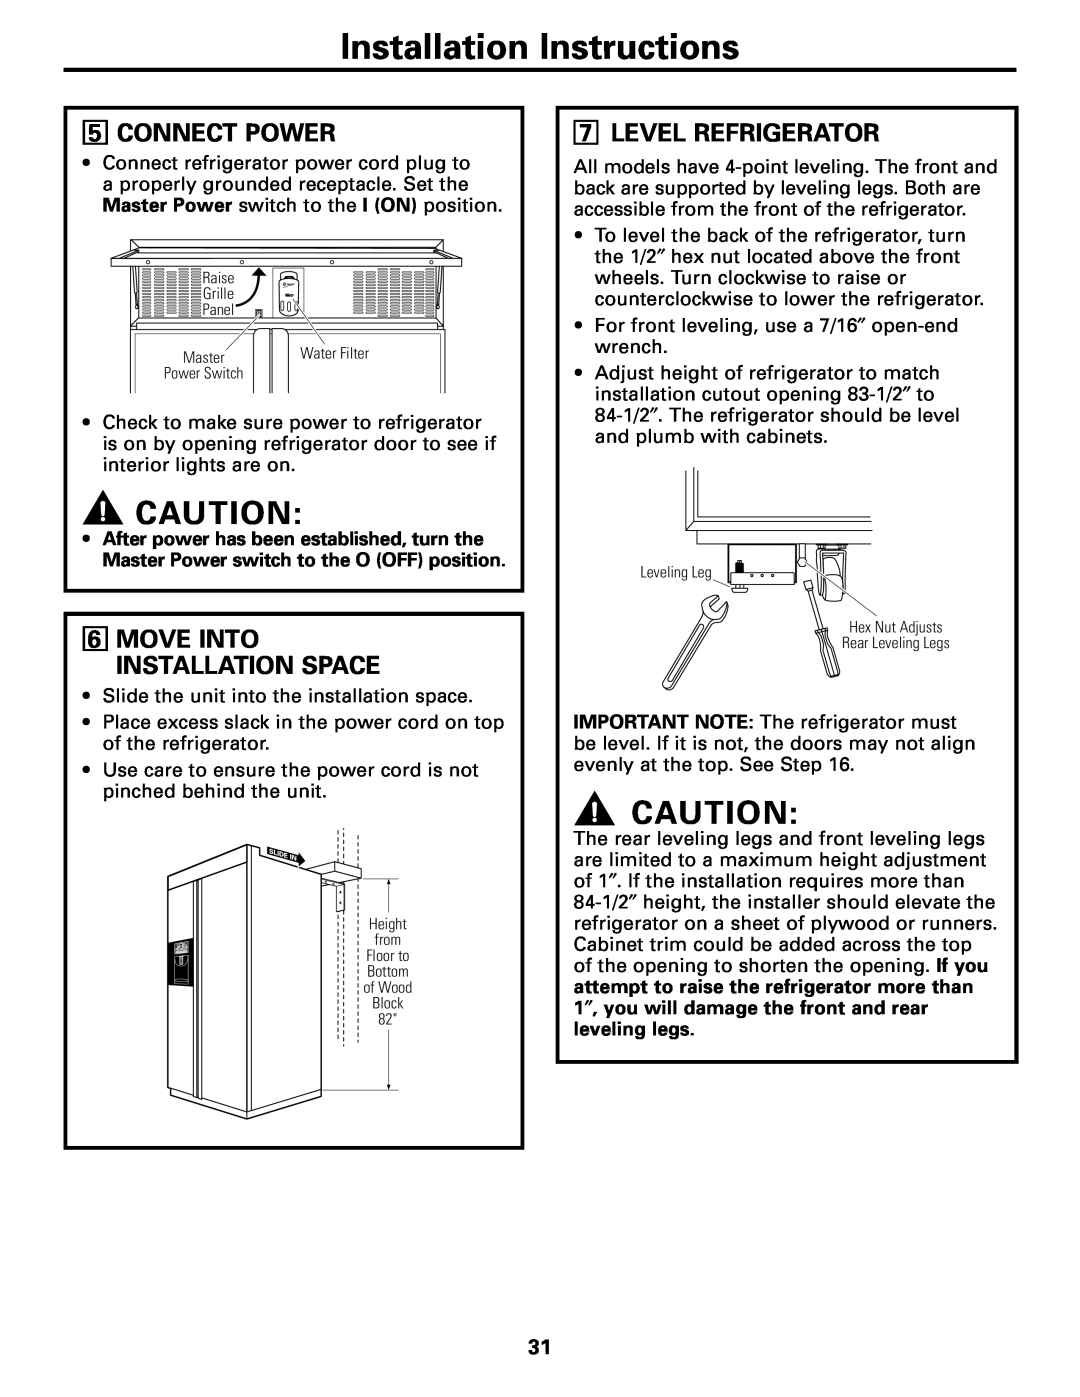 GE 48, 42 owner manual Connect Power, Level Refrigerator, Move Into Installation Space, Installation Instructions 